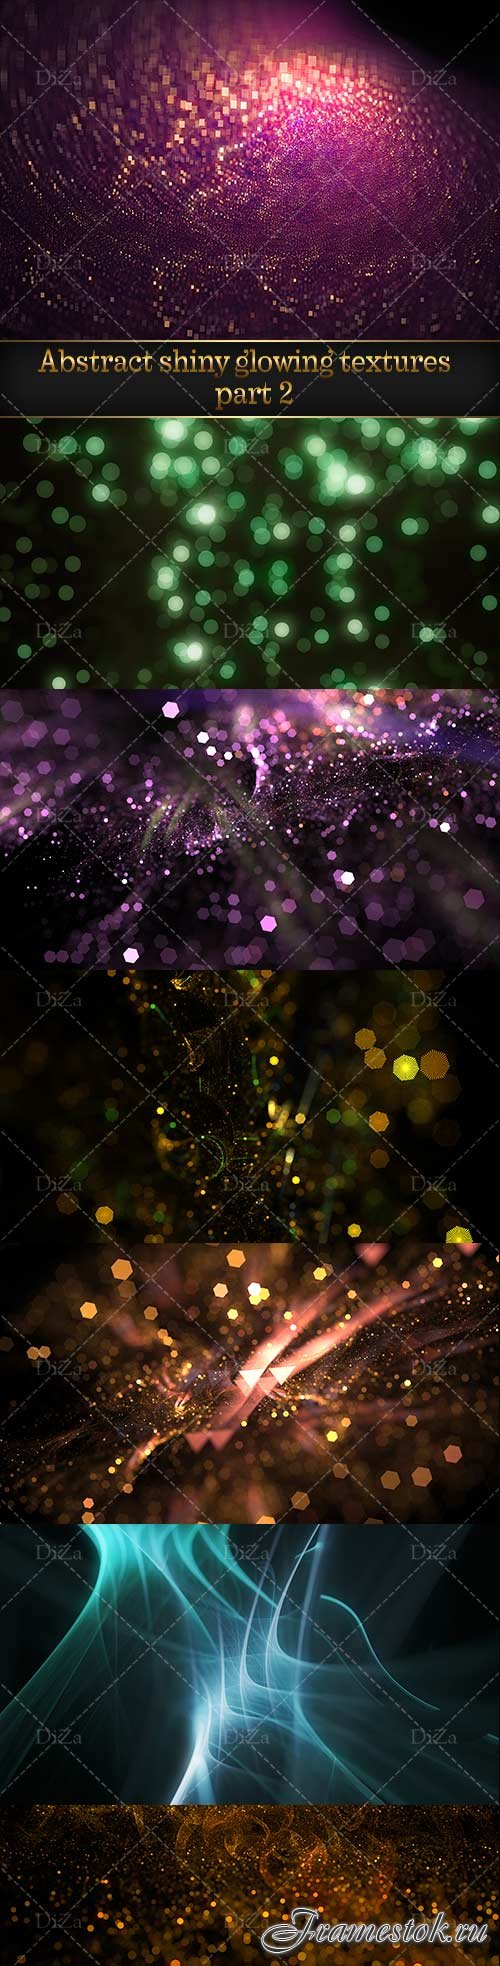 Abstract shiny glowing textures - 2